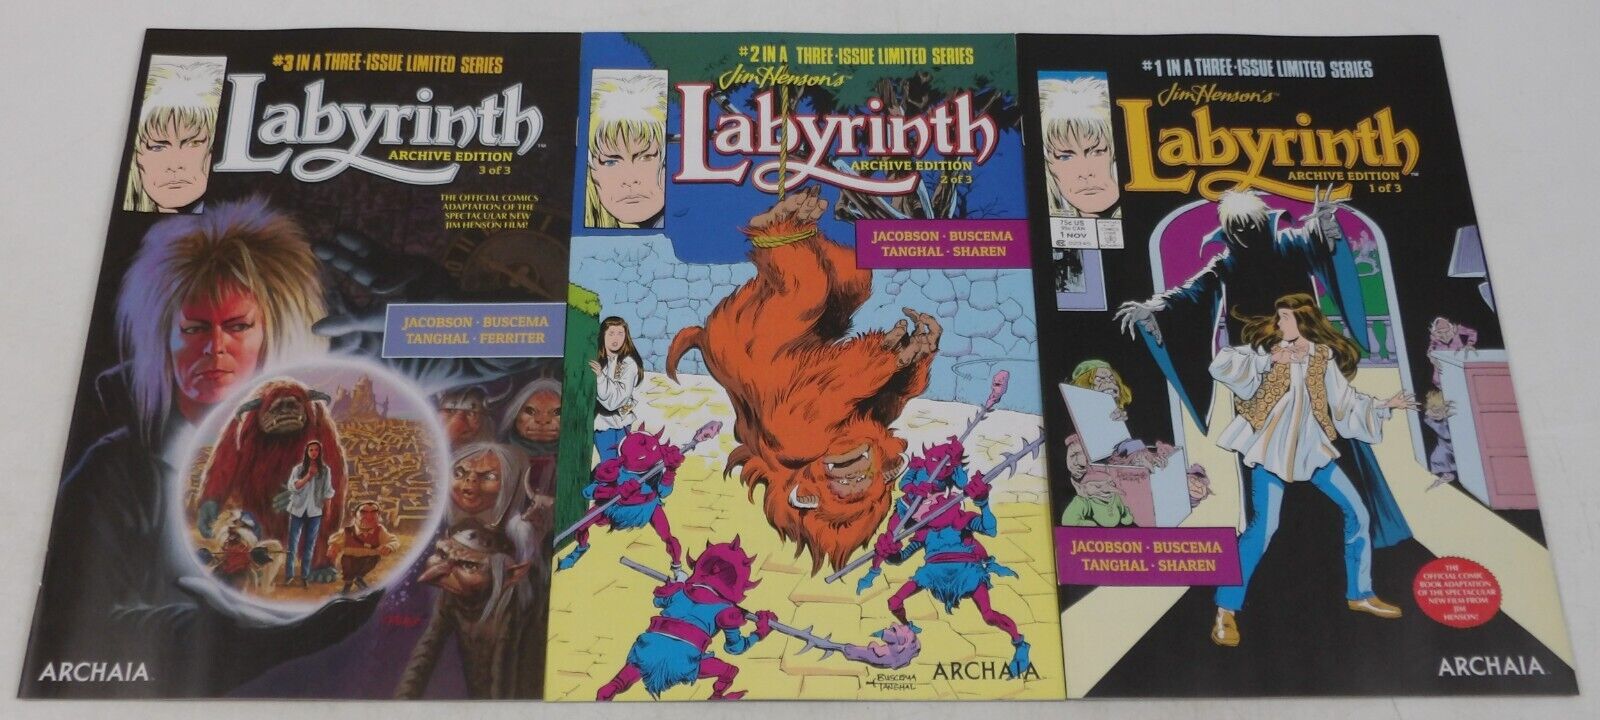 Jim Henson's Labyrinth Archive Edition #1-3 VF/NM complete series Archaia 2